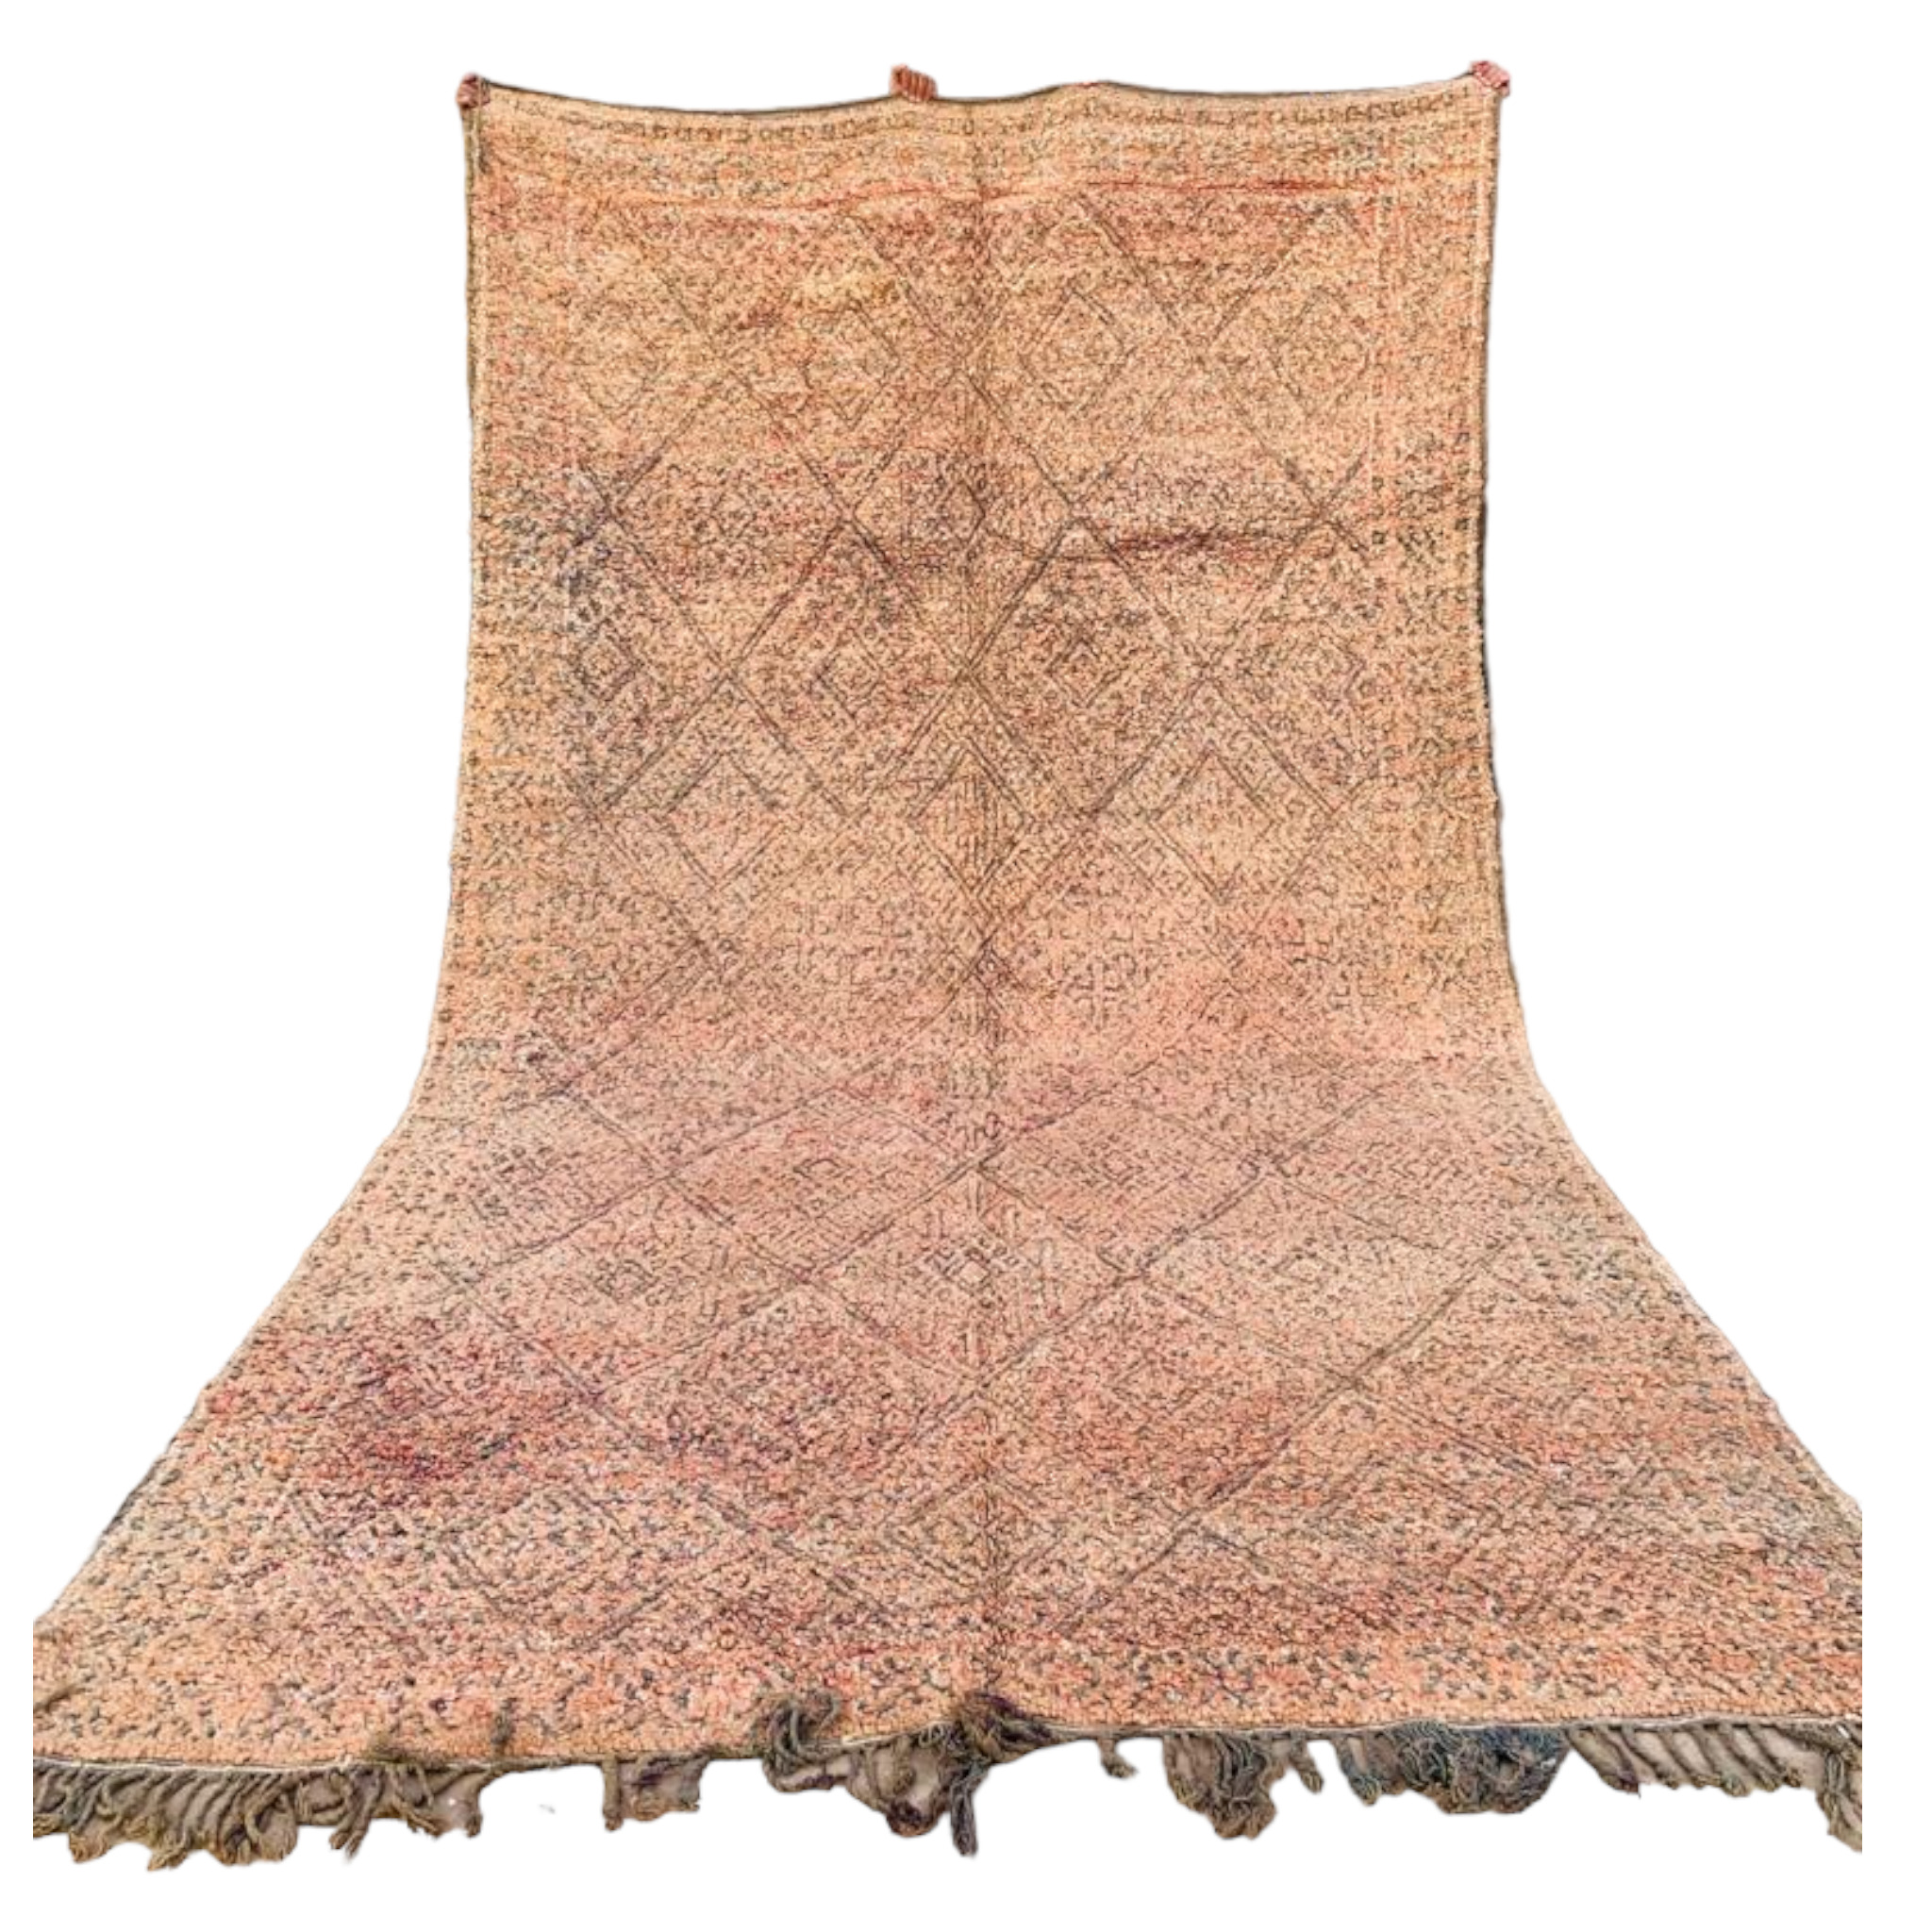 Stunning authentic vintage Moroccan rug.